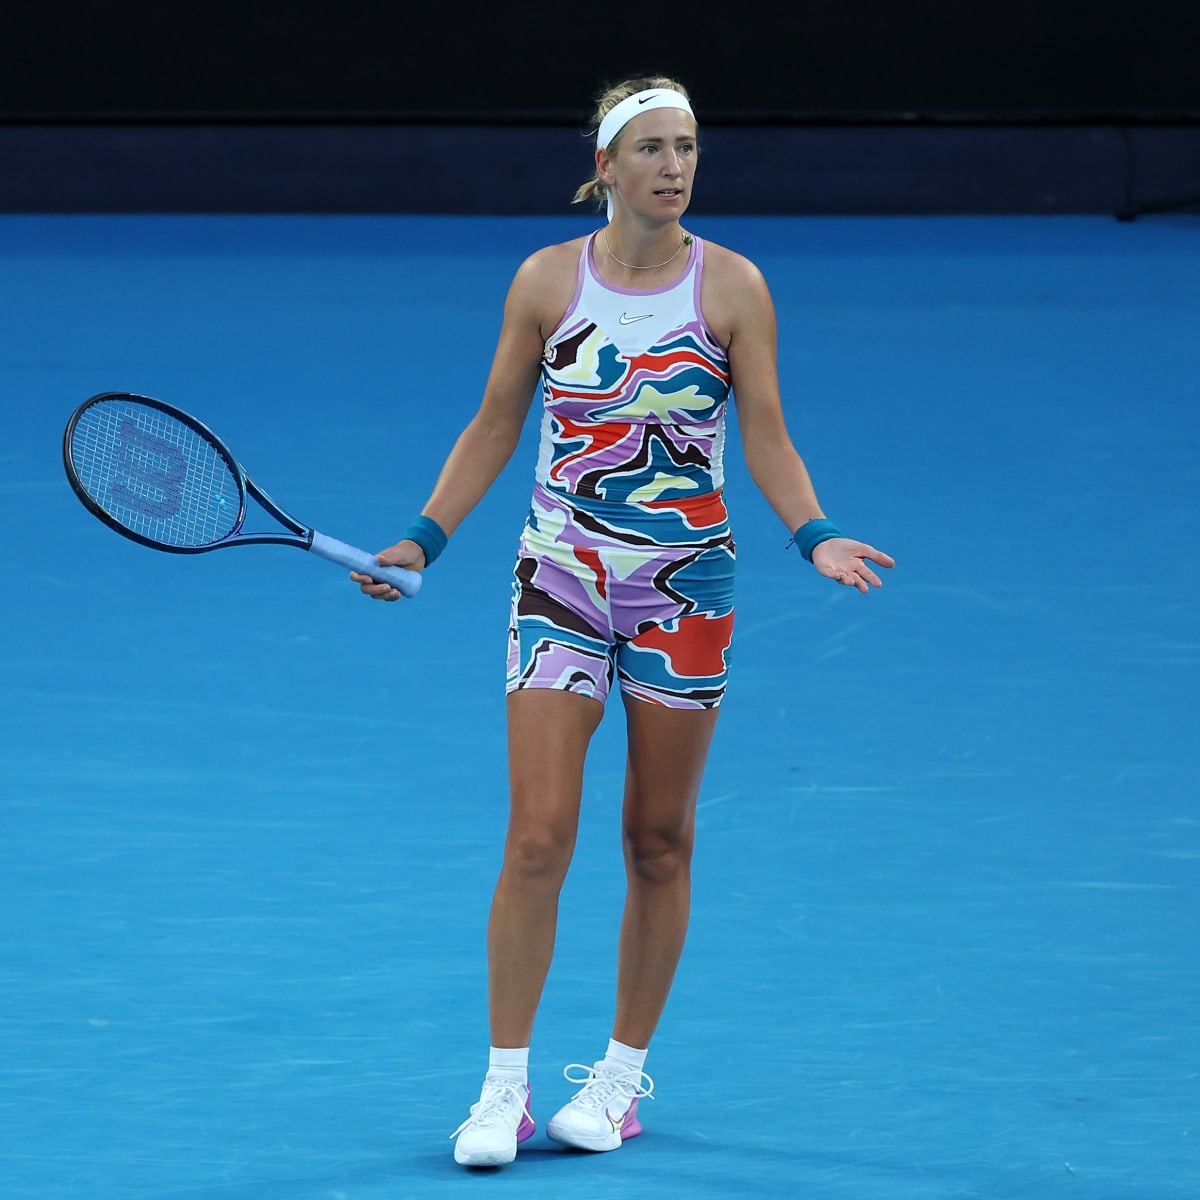 Look Tennis Star Asked To Remove Her Shirt Before Australian Open Match